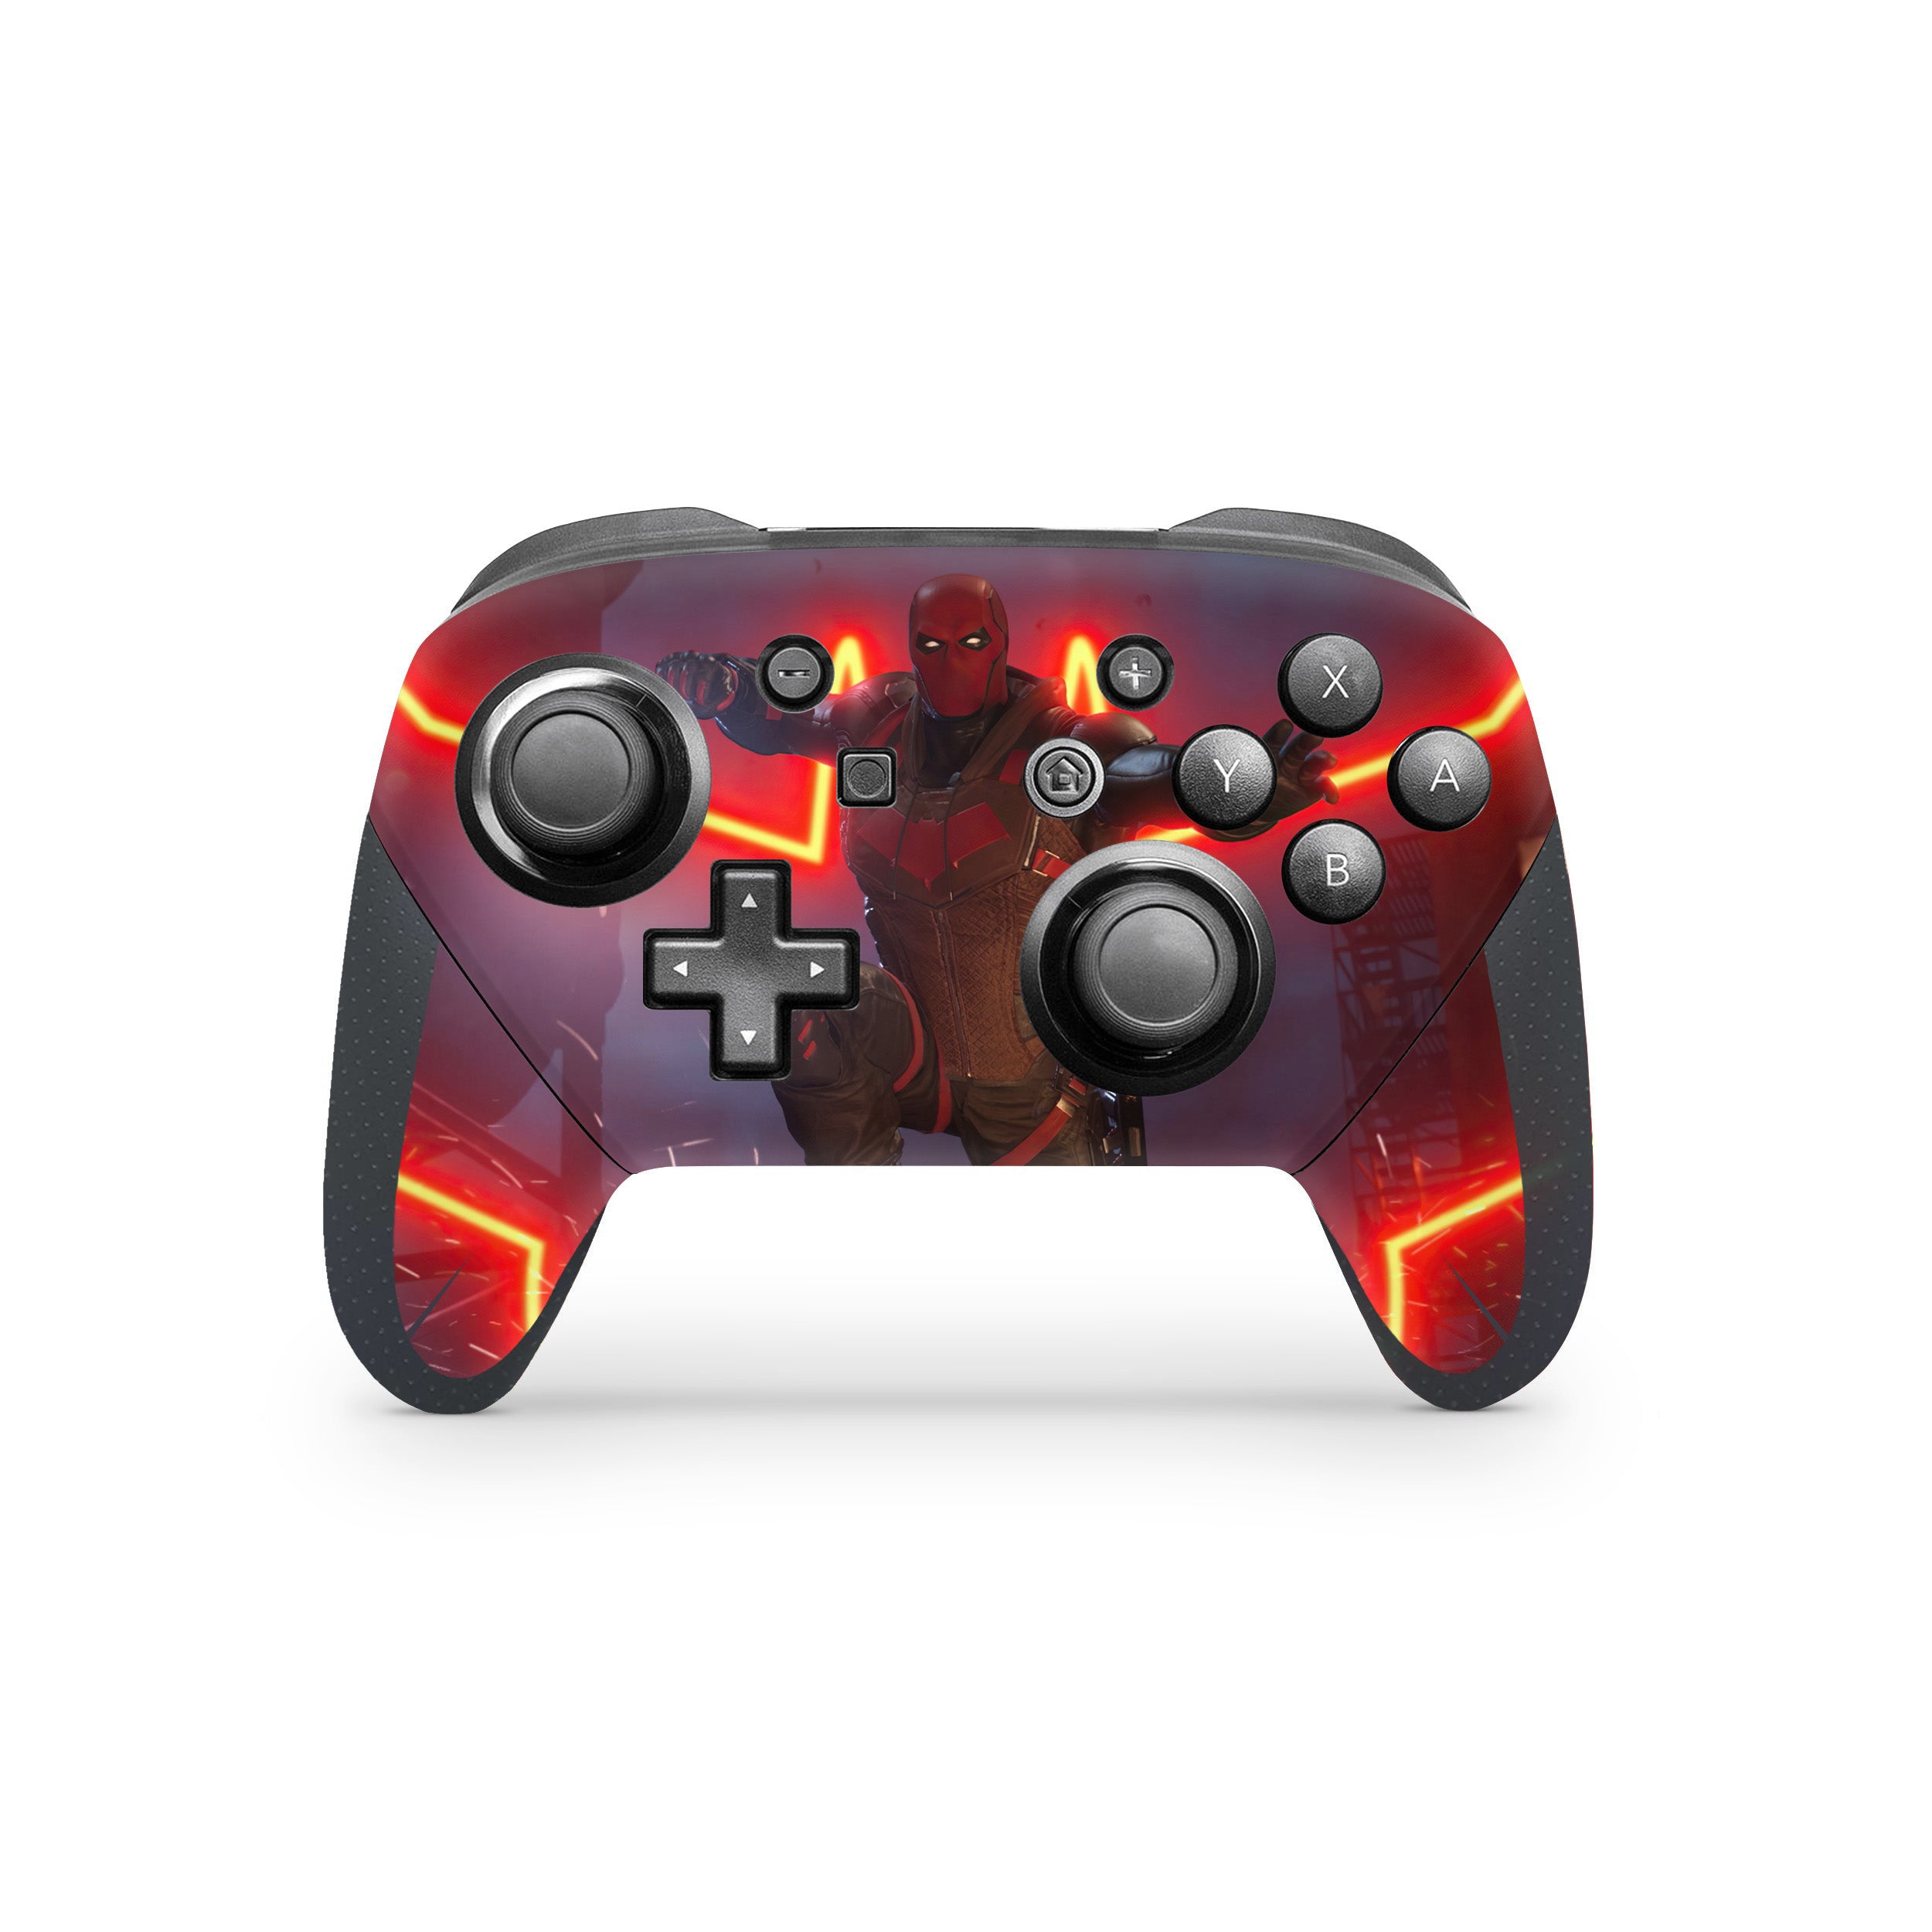 A video game skin featuring a DC Comics Red Hood design for the Switch Pro Controller.